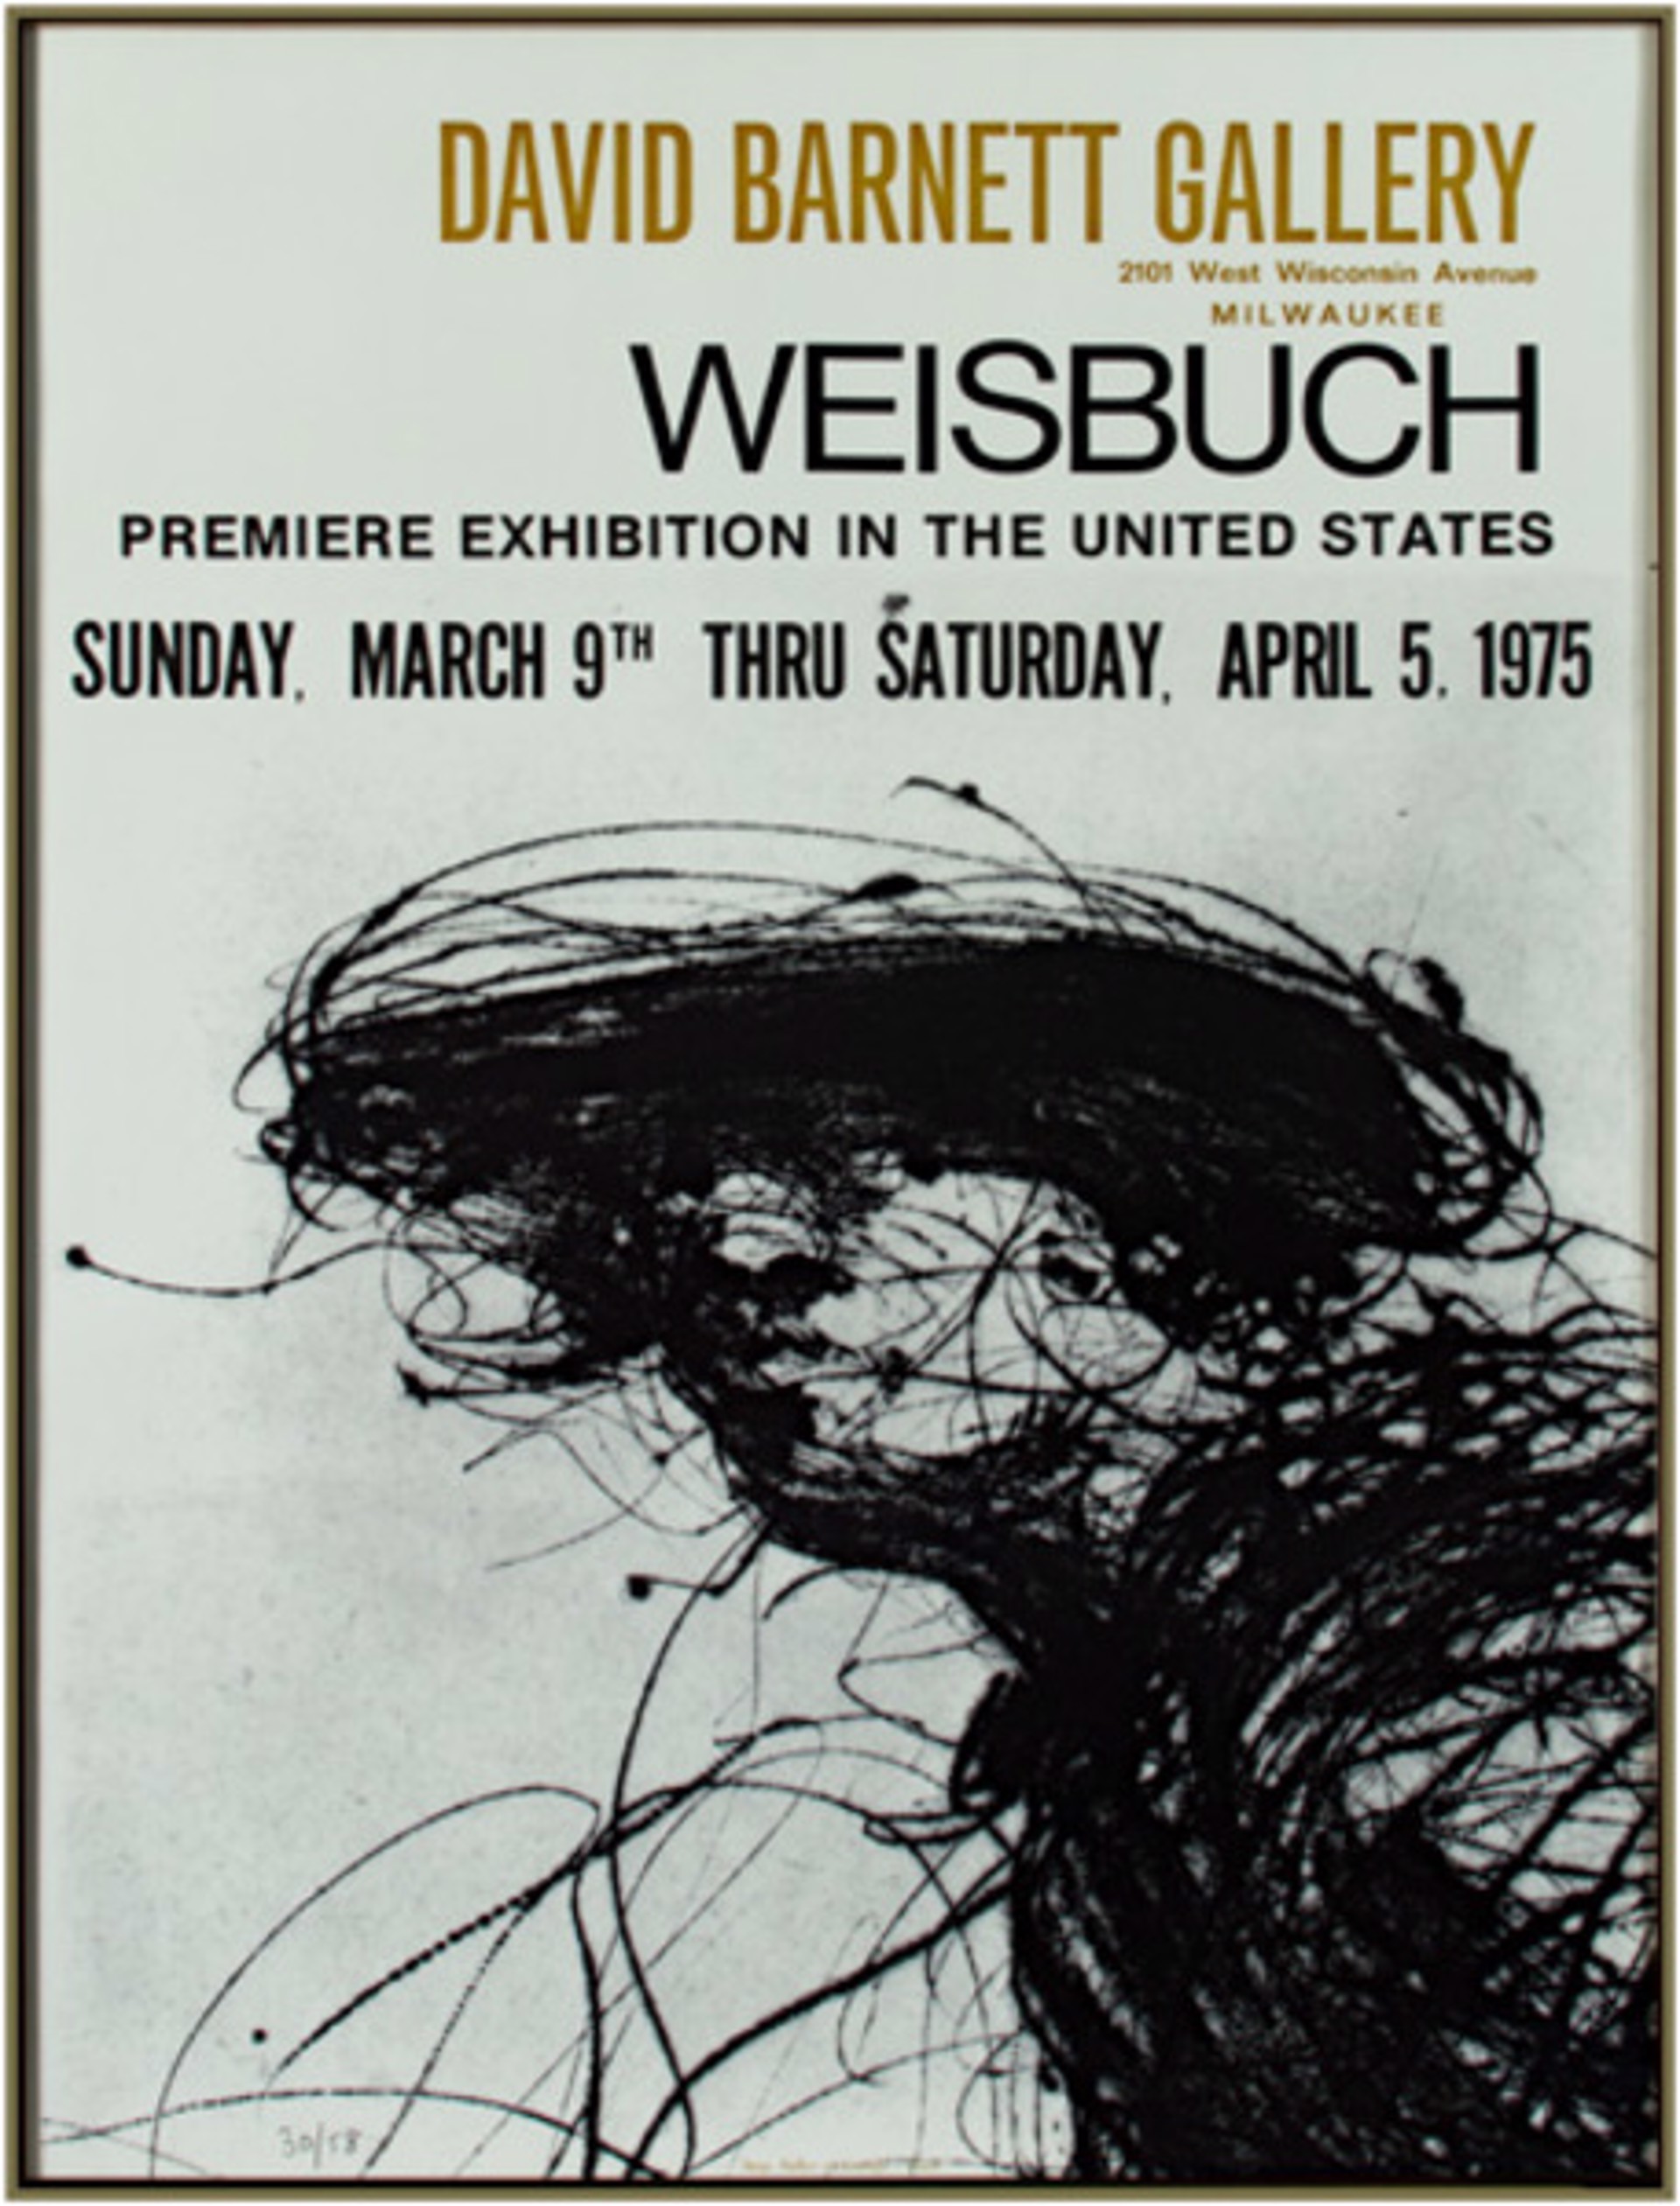 Vision Nouvelle Exhibition Poster by Claude Weisbuch